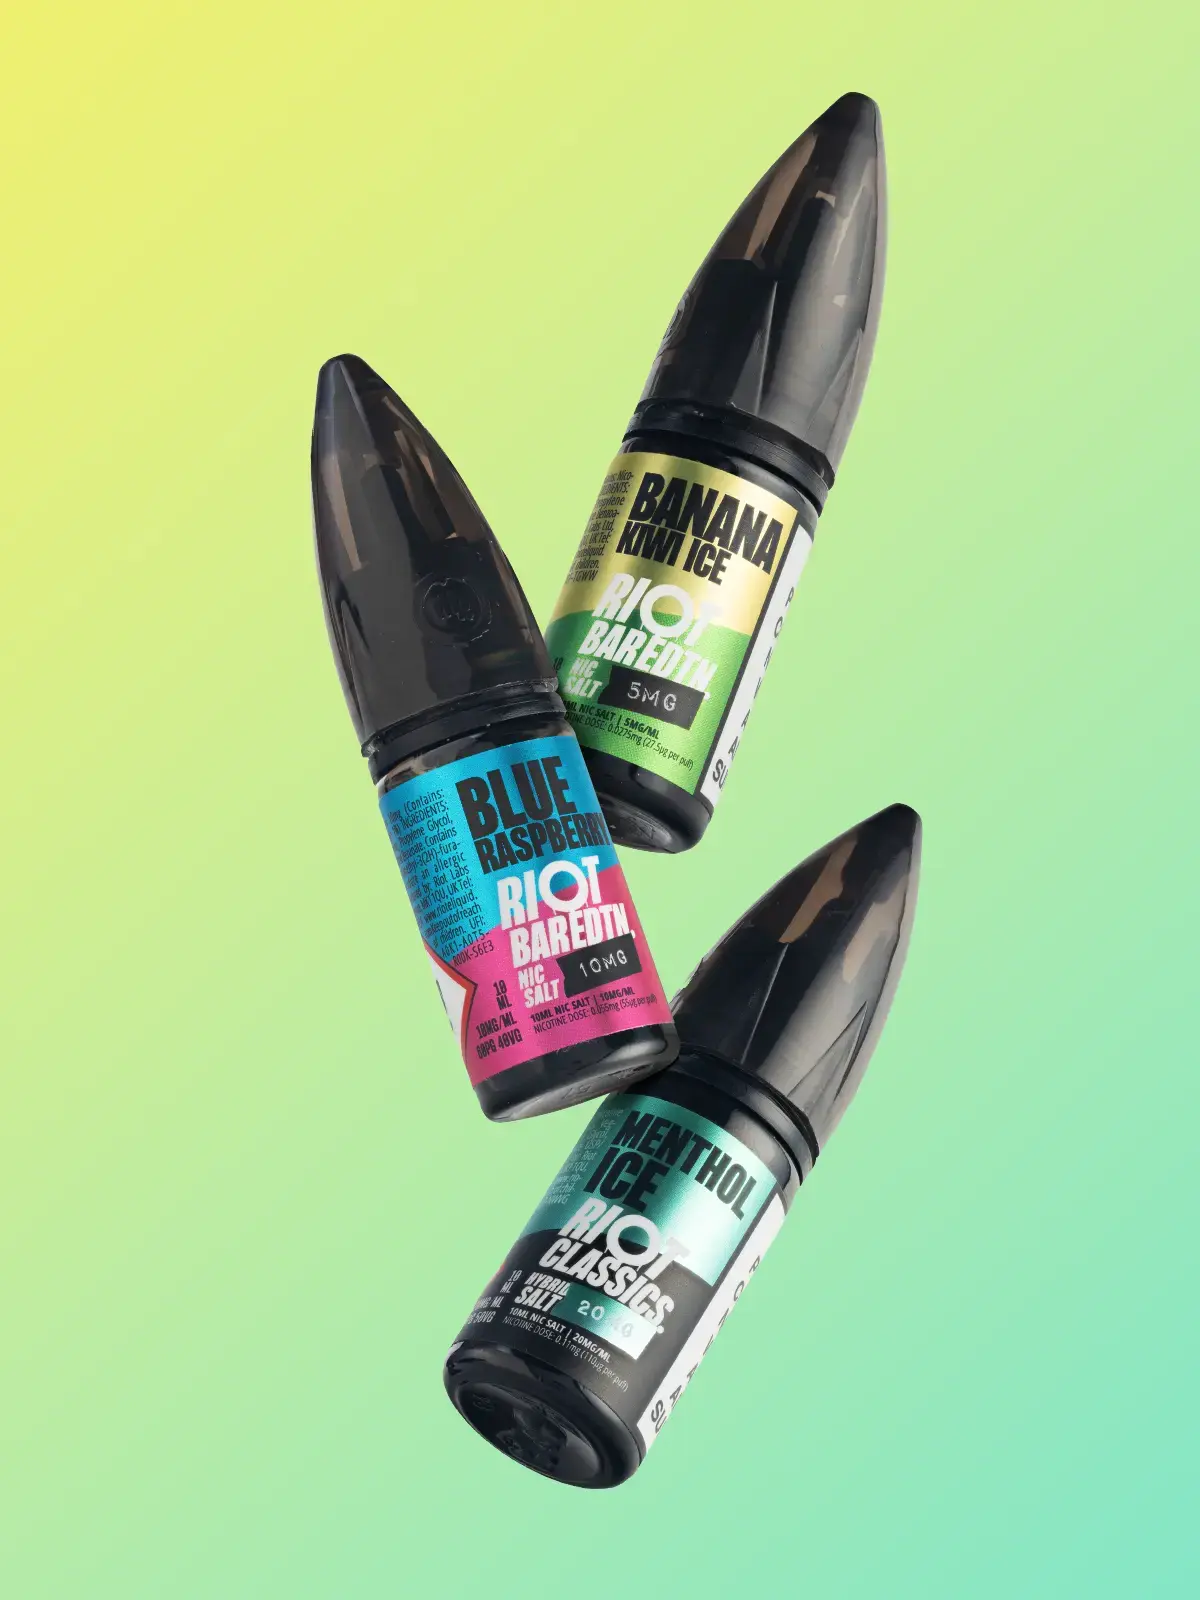 Three Riot E-liquid Bar Edtn e-liquids; Banana Kiwi Ice, Blue Raspberry and Menthol Ice, floating in front of a two-toned gradient green background